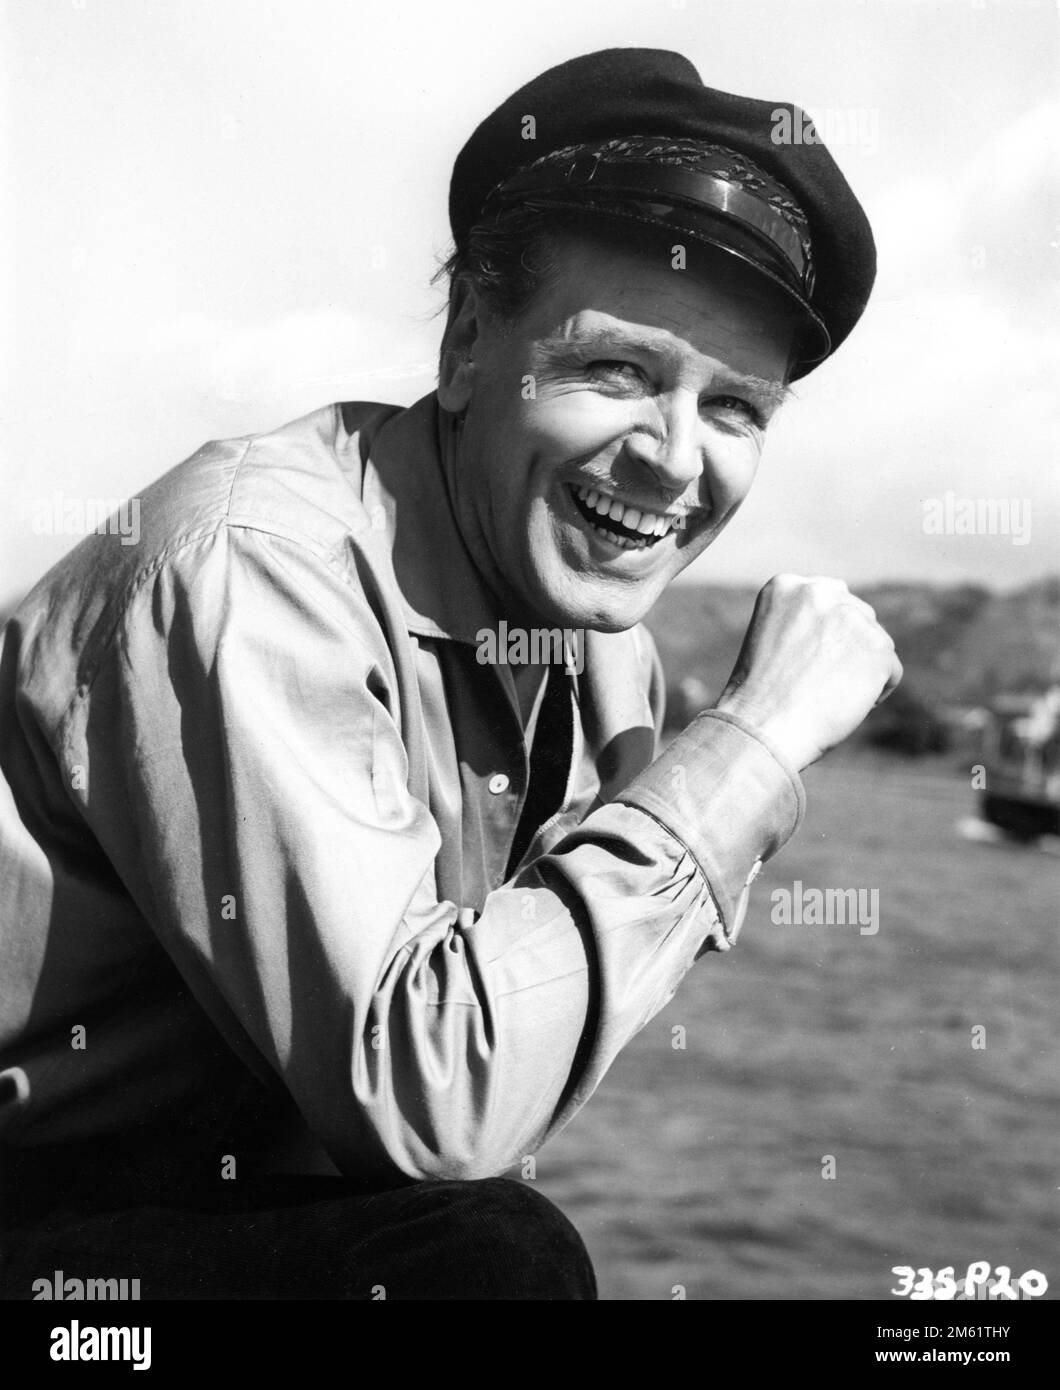 O.W. FISCHER Portrait on boat on river Rhine in WHIRLPOOL 1959 director LEWIS ALLEN novel / screenplay The Lorelei by Lawrence P. Bachmann music Ron Goodwin costume design Julie Harris The Rank Organisation Stock Photo